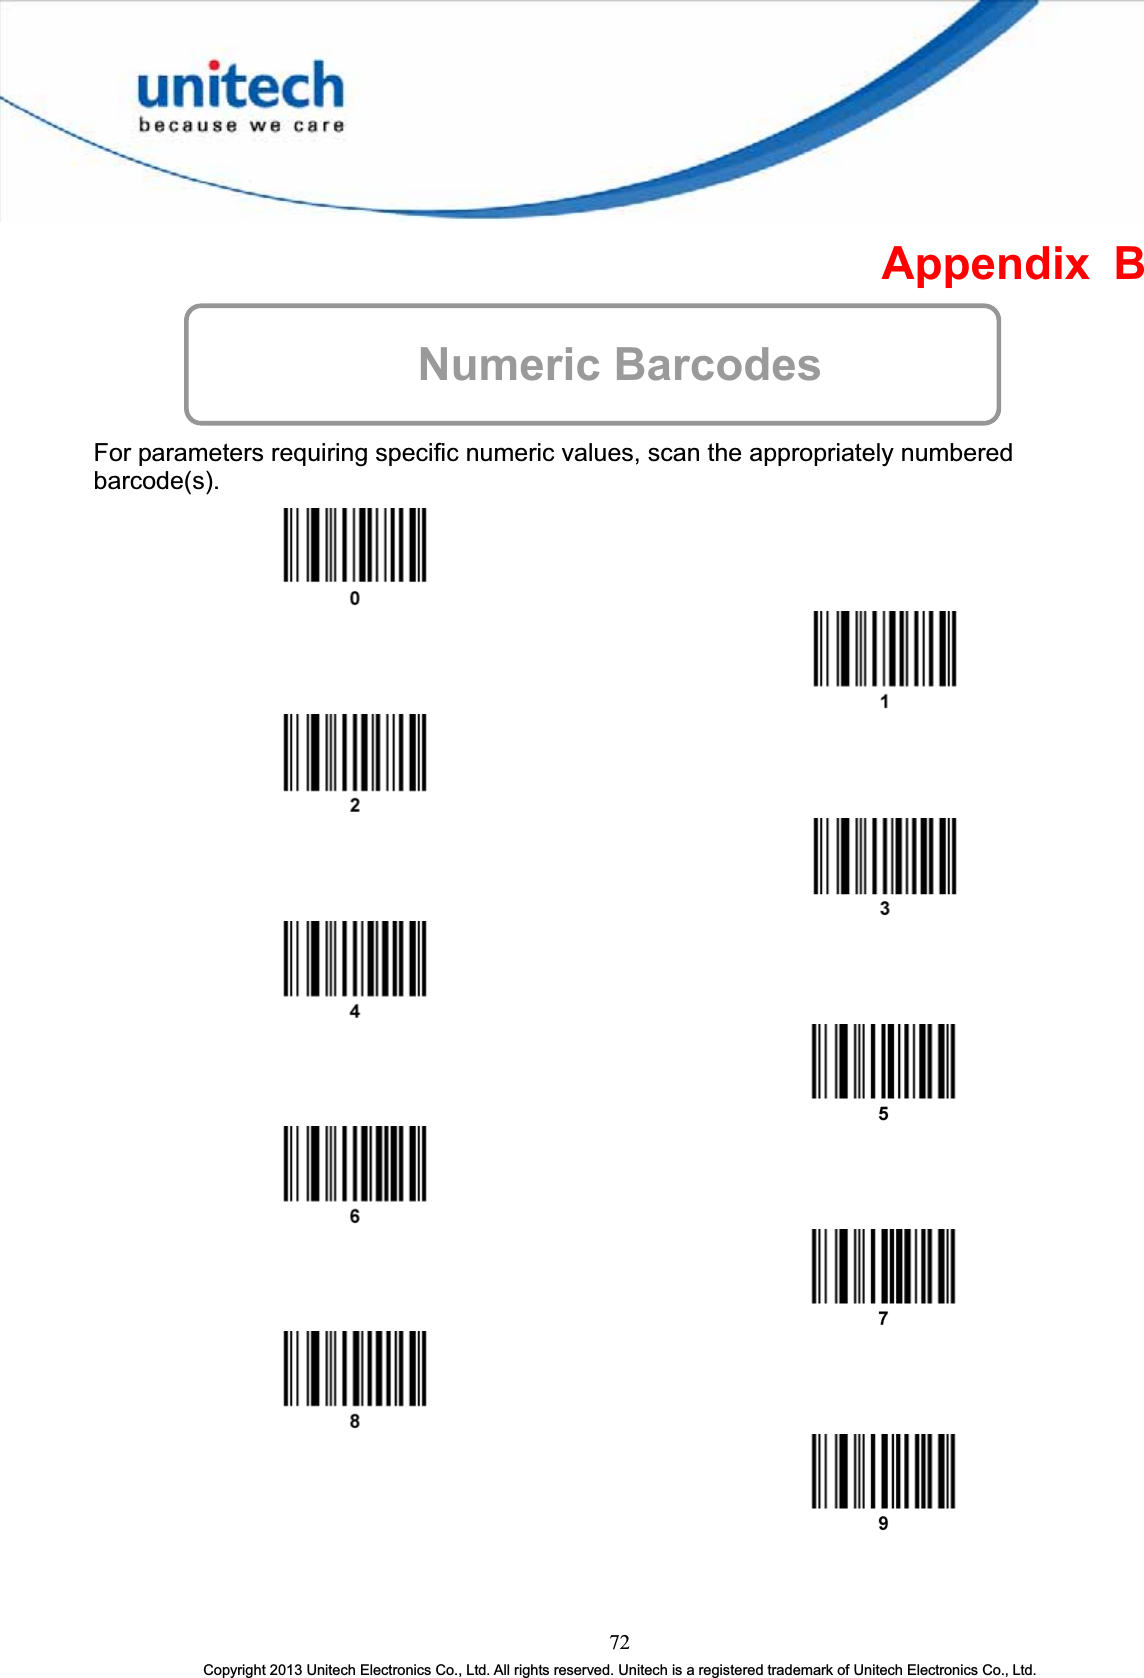 Appendix B Numeric BarcodesFor parameters requiring specific numeric values, scan the appropriately numbered barcode(s).72Copyright 2013 Unitech Electronics Co., Ltd. All rights reserved. Unitech is a registered trademark of Unitech Electronics Co., Ltd.